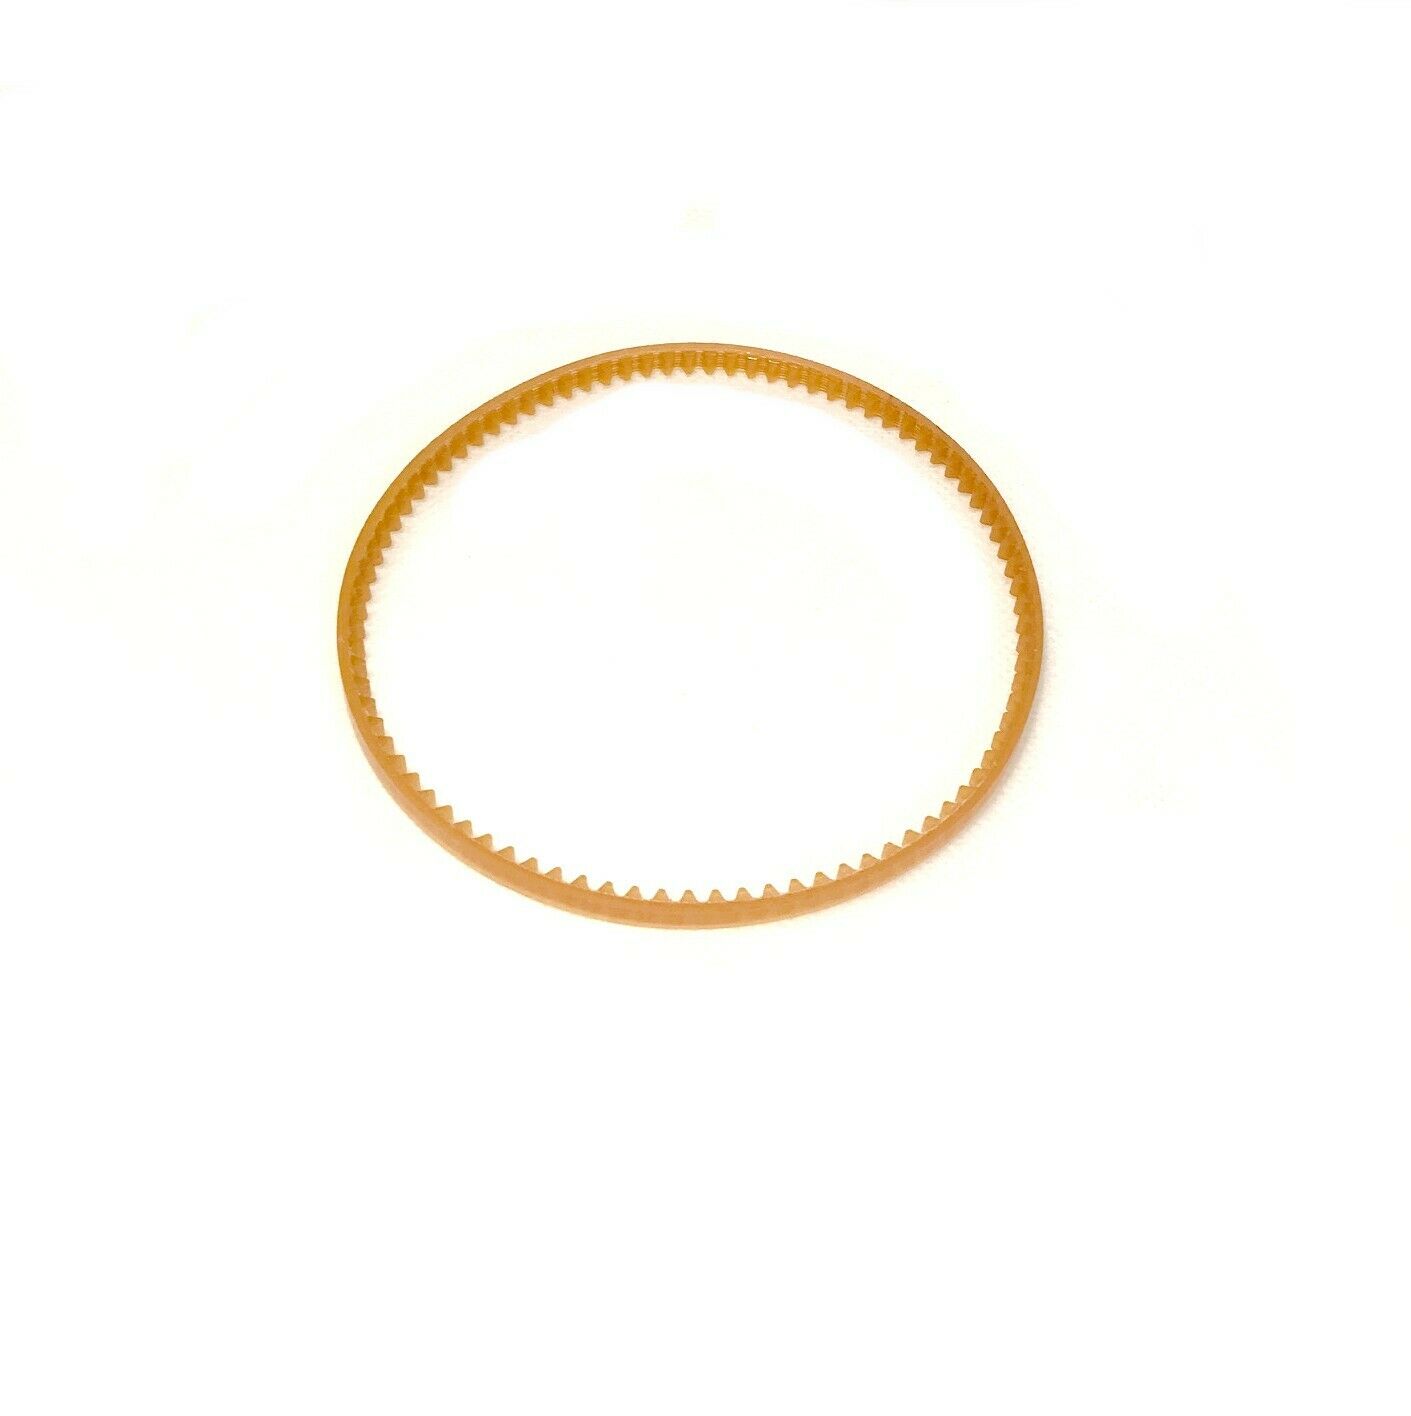 Replacement Drive Belt For Cotton Candy Machine, Vortex, Spin 2000 & More